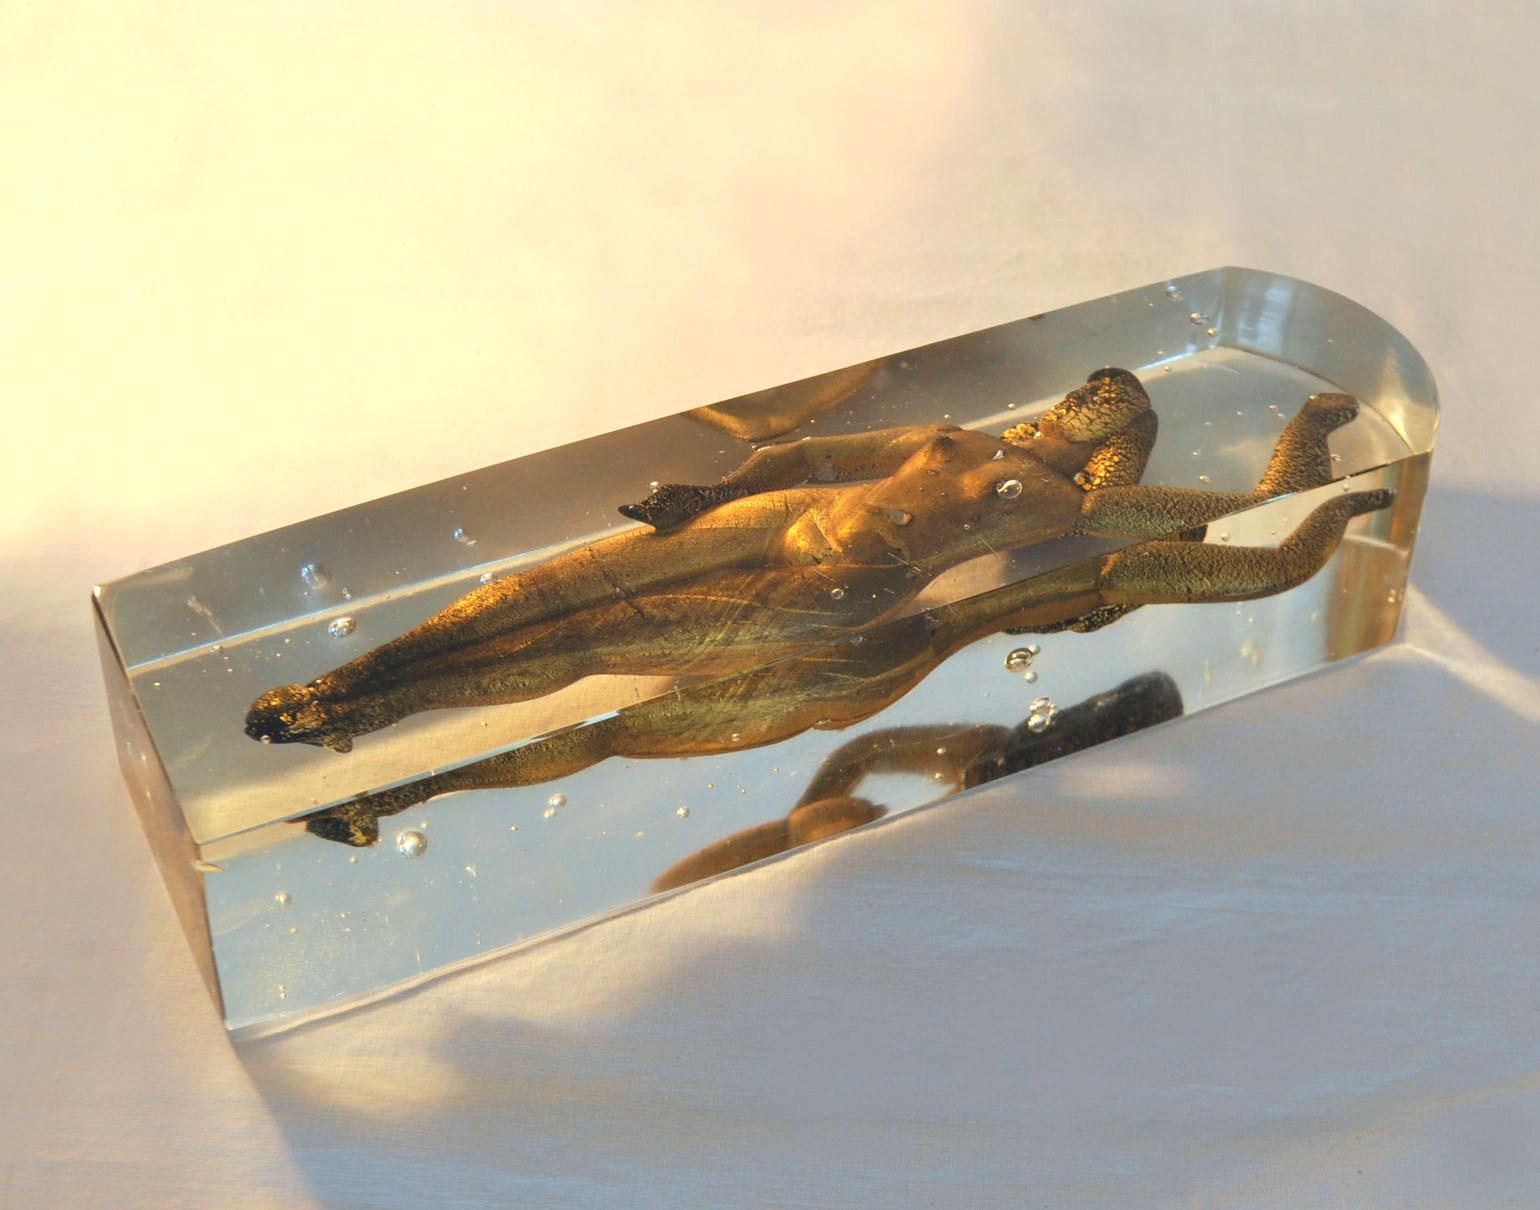 Female torso in glass block paperweight with a nude women in black glass and gold flakes applied over black, floating inside clear glass.

Ref, Roberto Aloi, Esempi, Verti d’ Oggi, Mainland 1955, p. 61, Macc Heiremans Murano Glass, Themes and